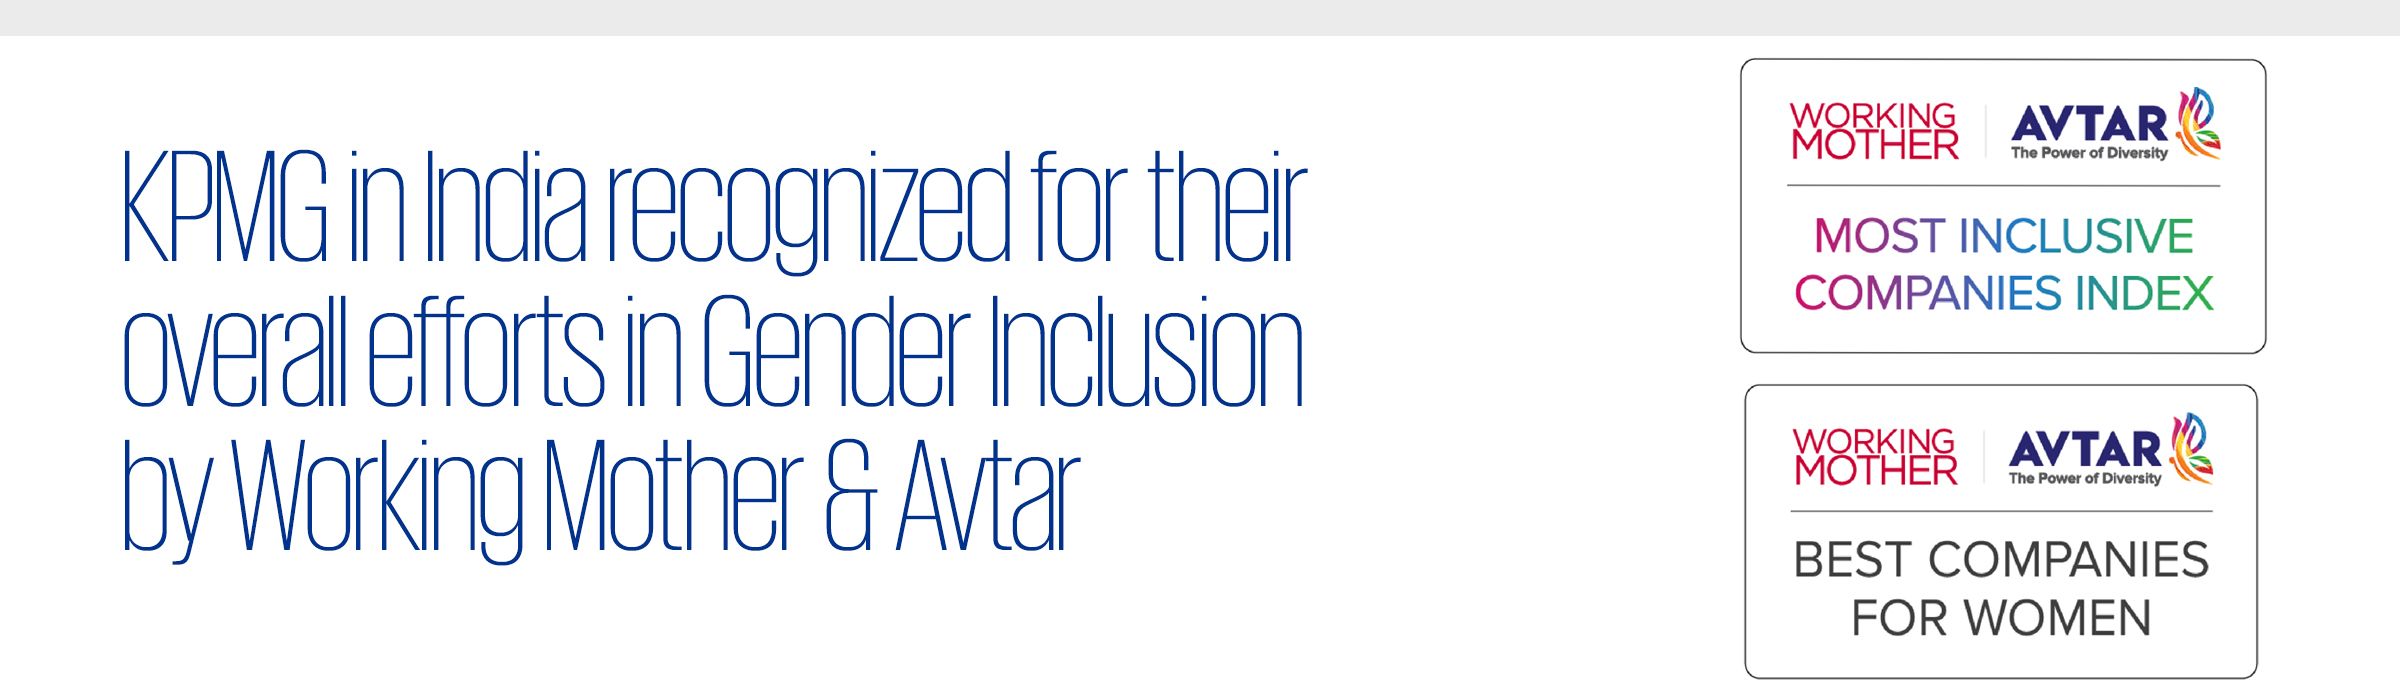 KPMG in India recognized for their overall efforts in Gender Inclusion